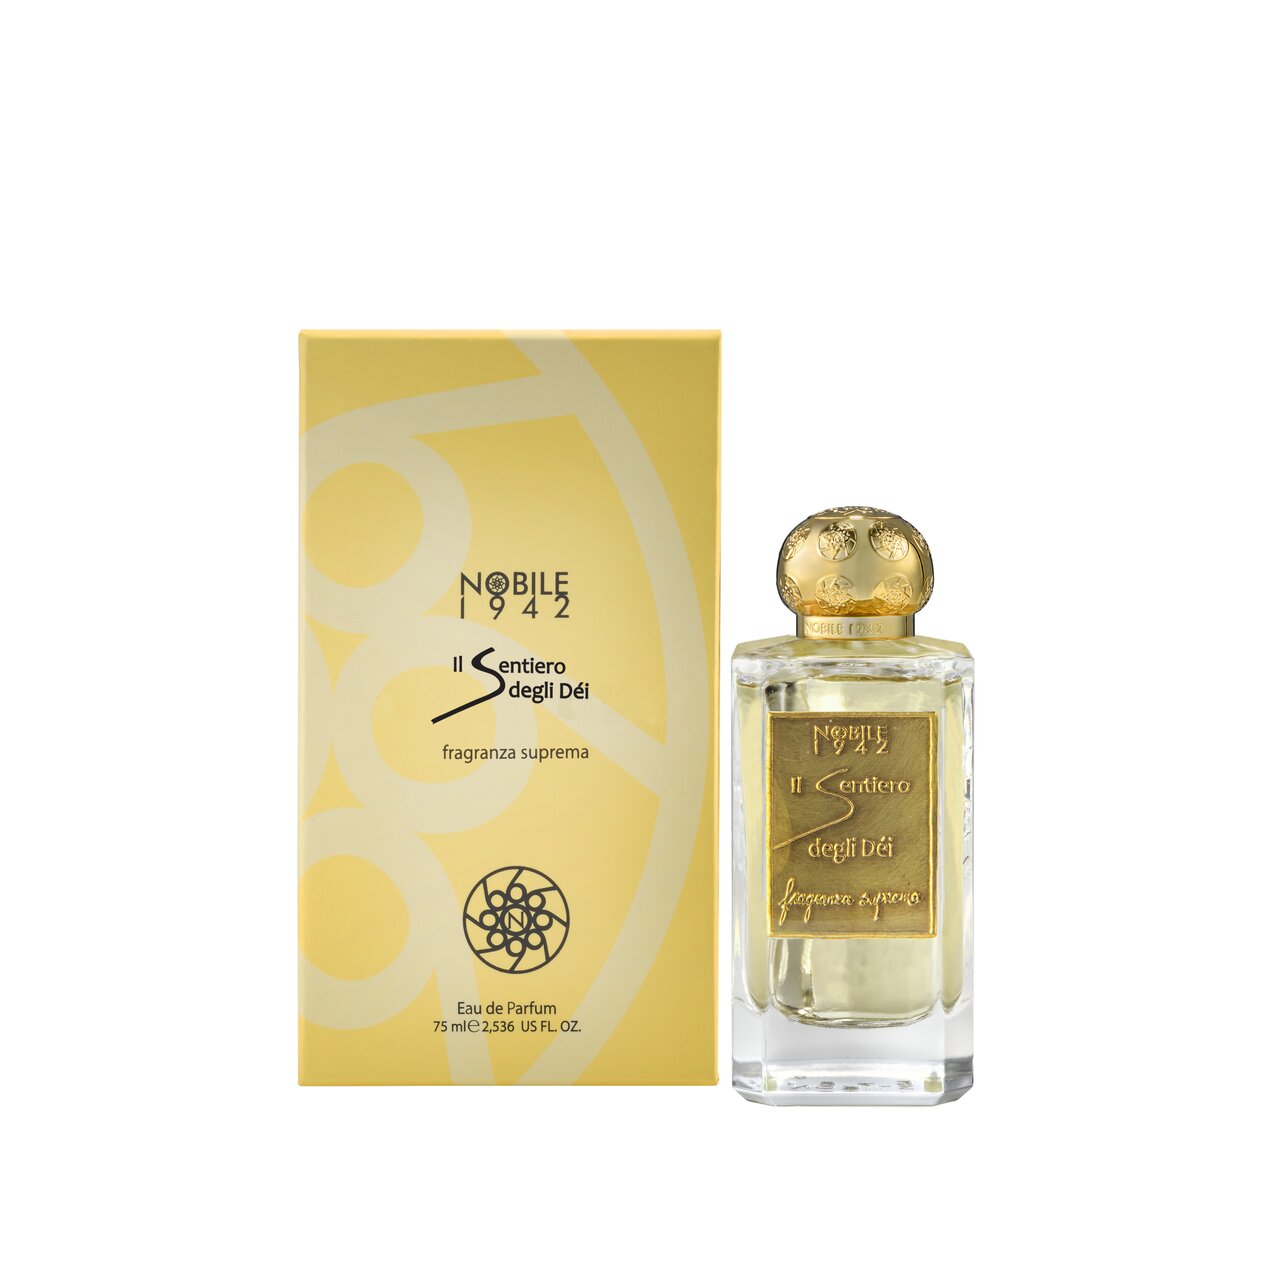 Nobile 1942 - Perfumes and Fragrances Made in Italy